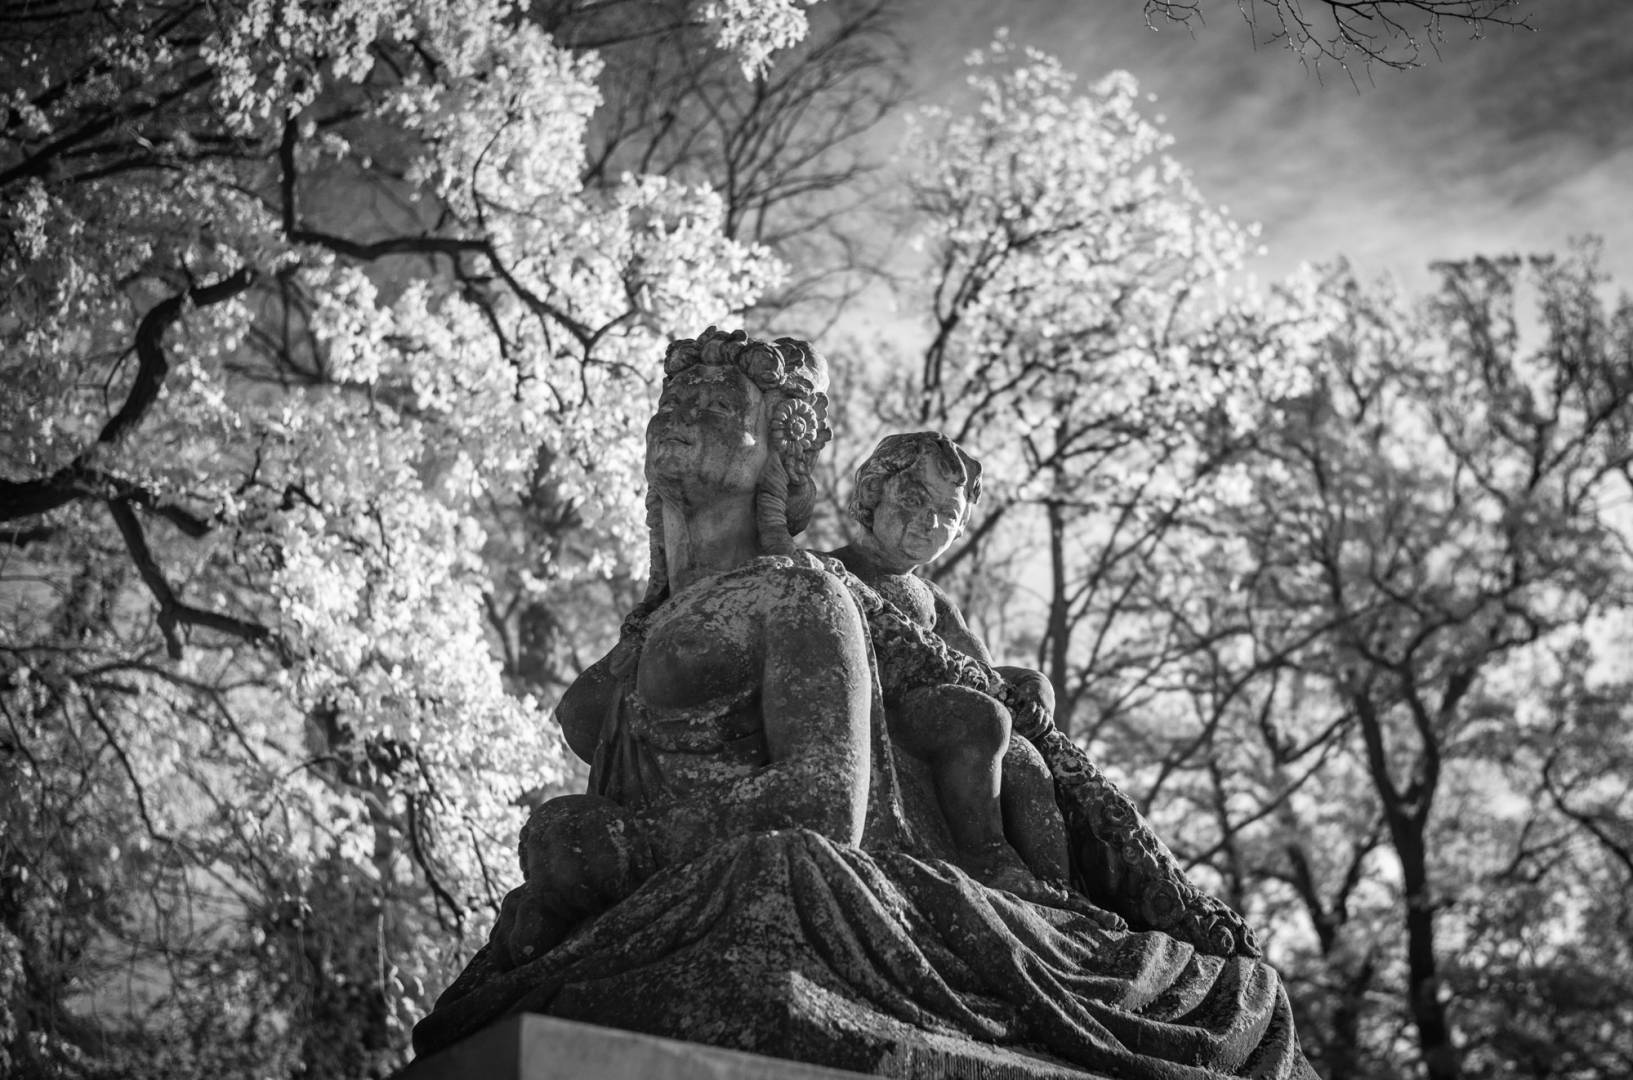  Sphinx. Leica M10-M with 35mm Summilux 1/125s f/2.0 ISO 3200 Infrared Filter 715